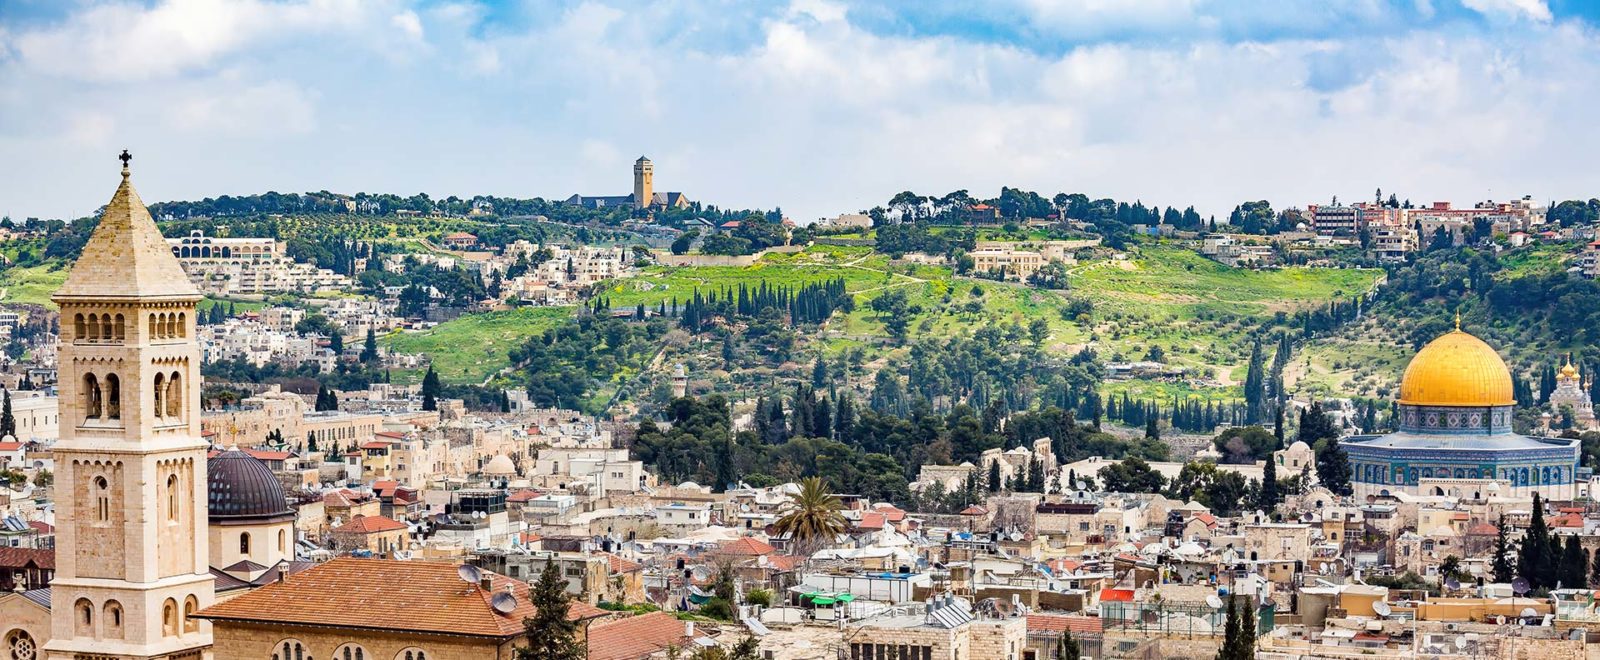 Ten things you can only do in Israel